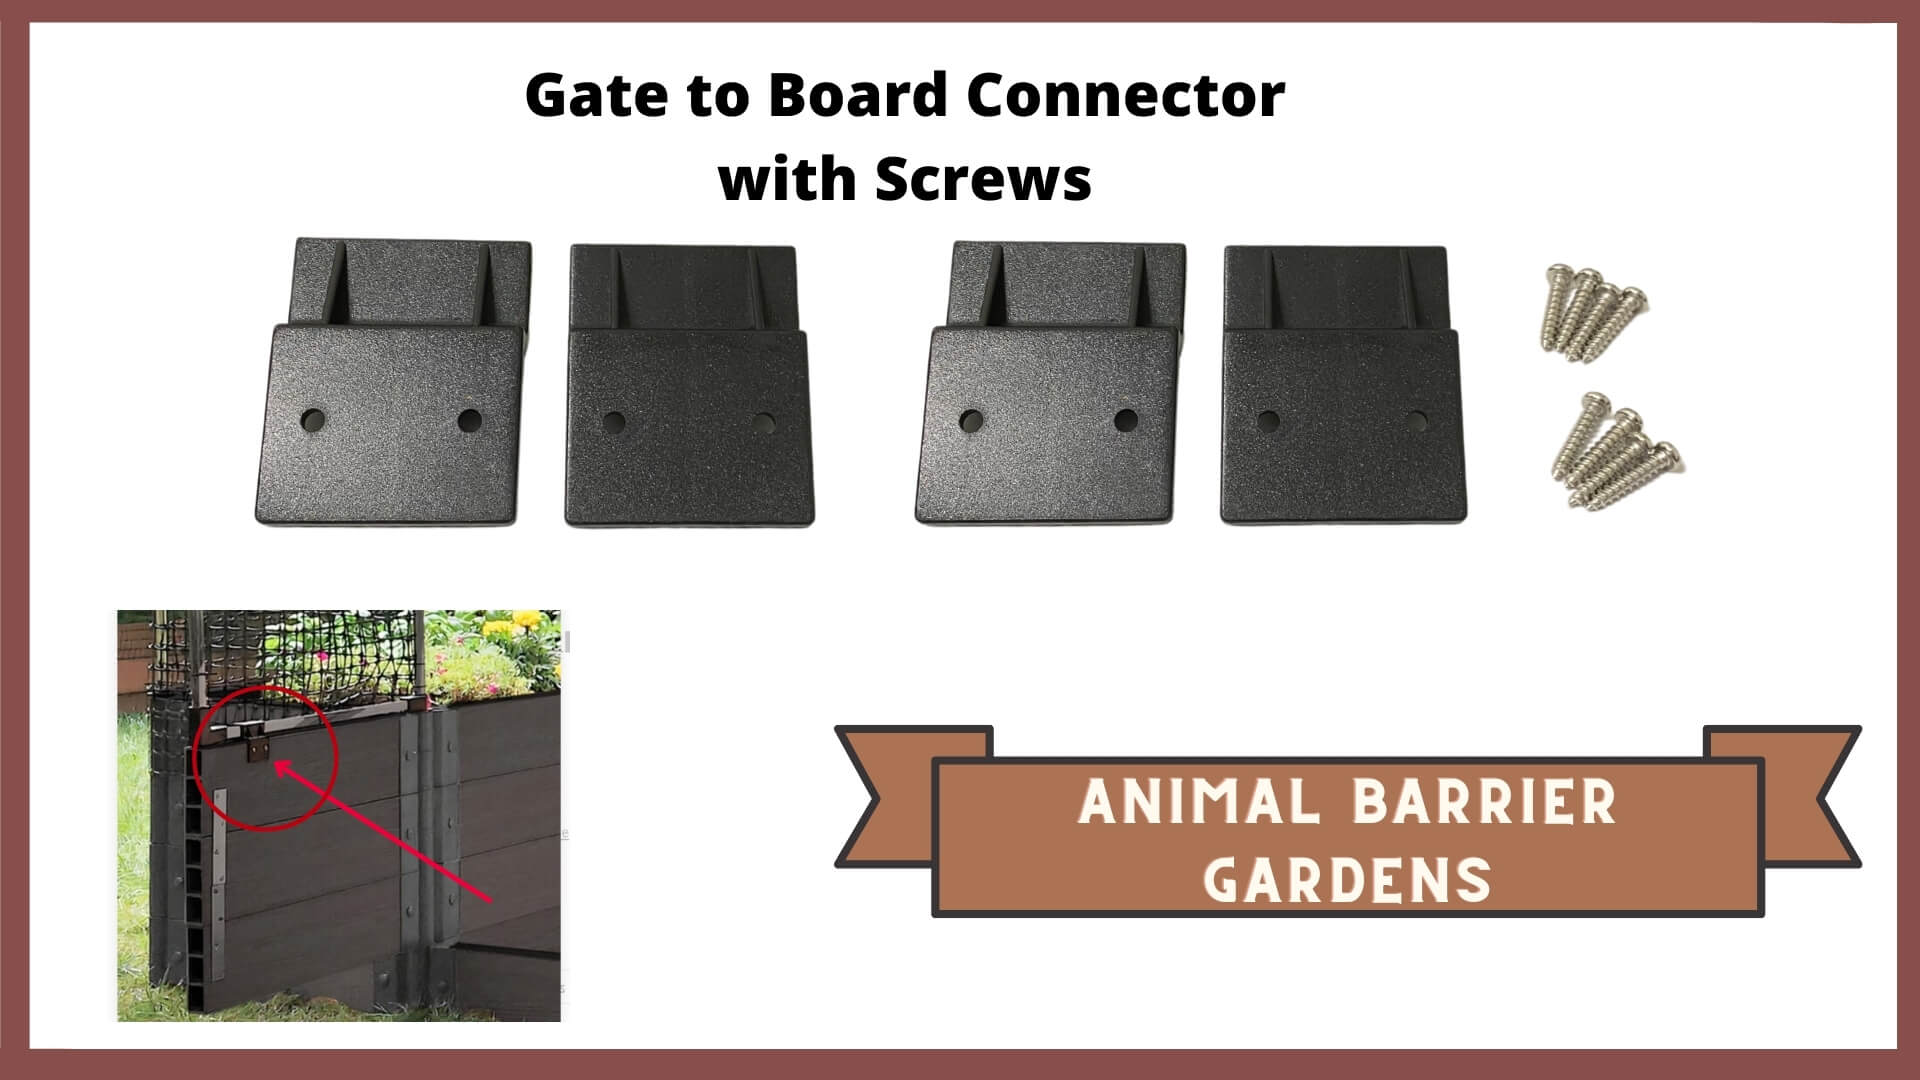 REPLACEMENT PARTS for: Stack & Extend Animal Barrier Kits & Gardens